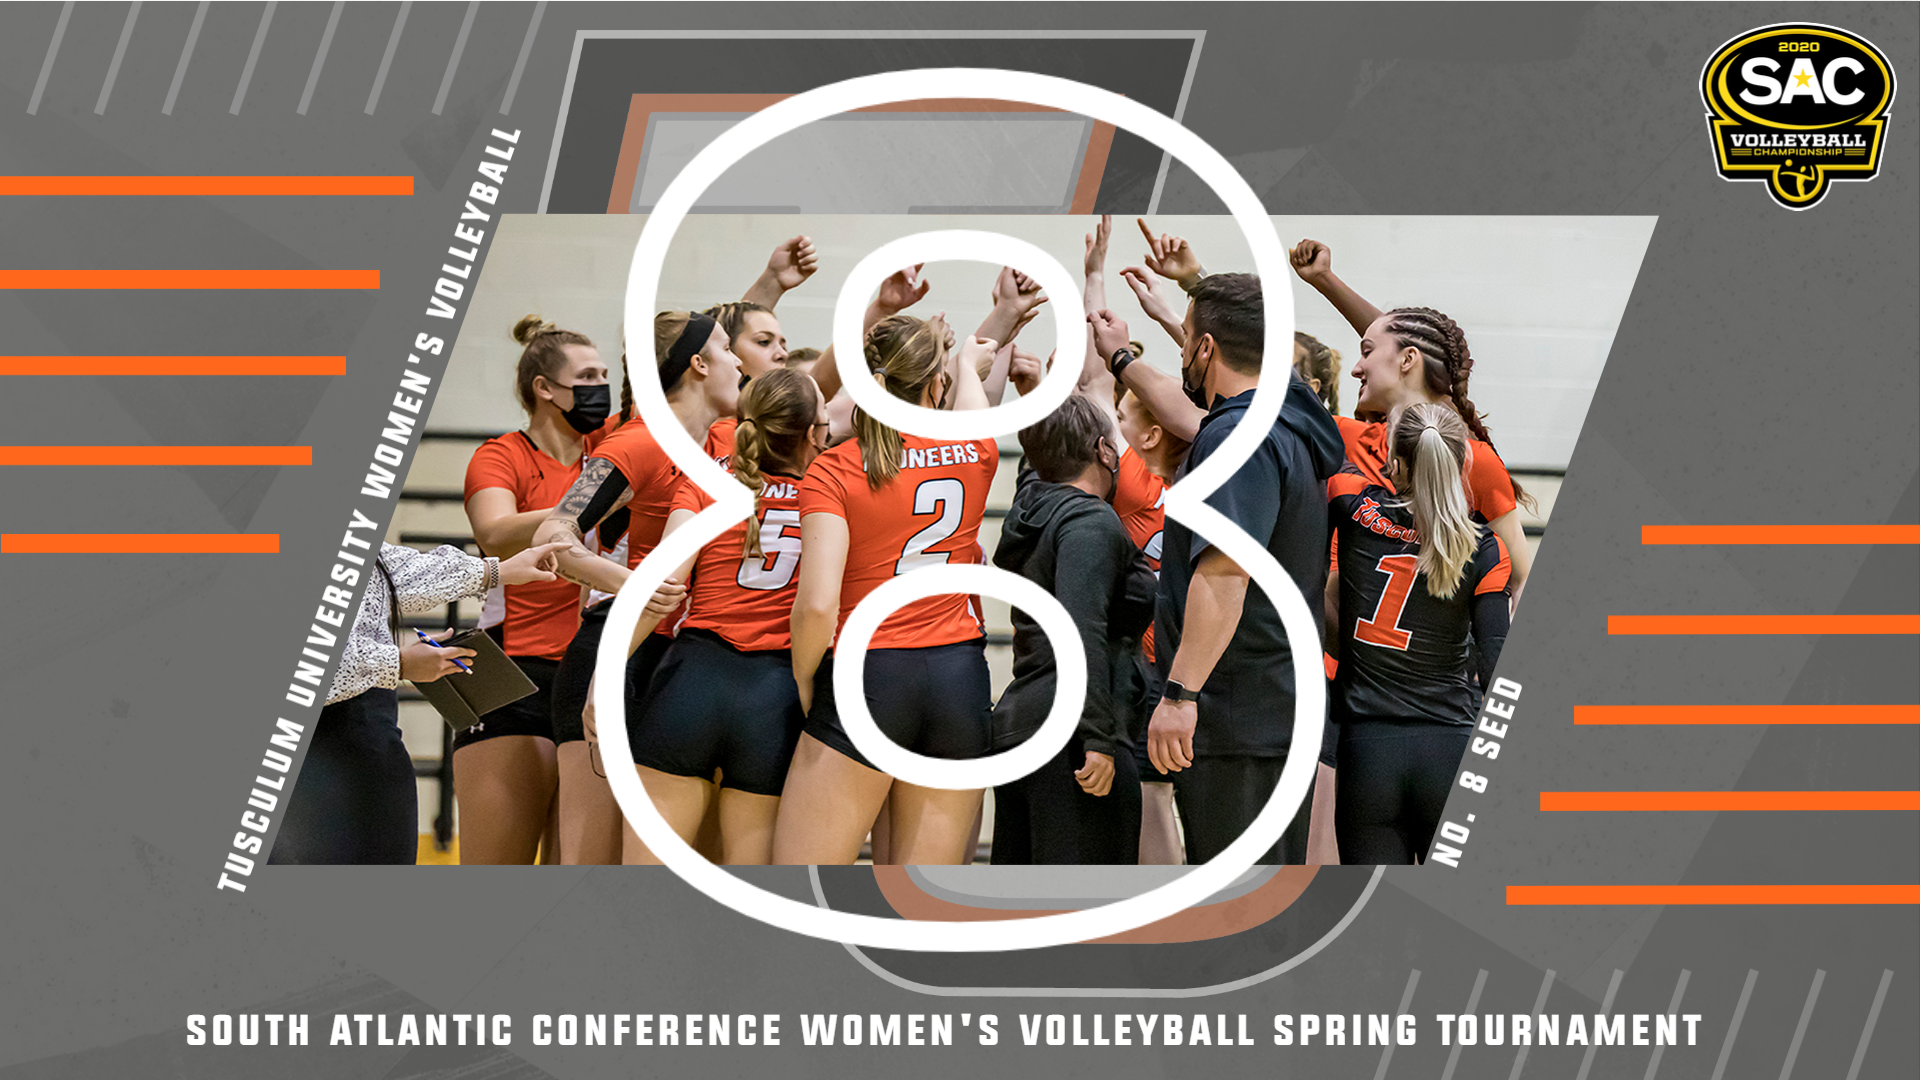 No. 8 seed Tusculum faces top seeded Wingate in SAC championship quarterfinal